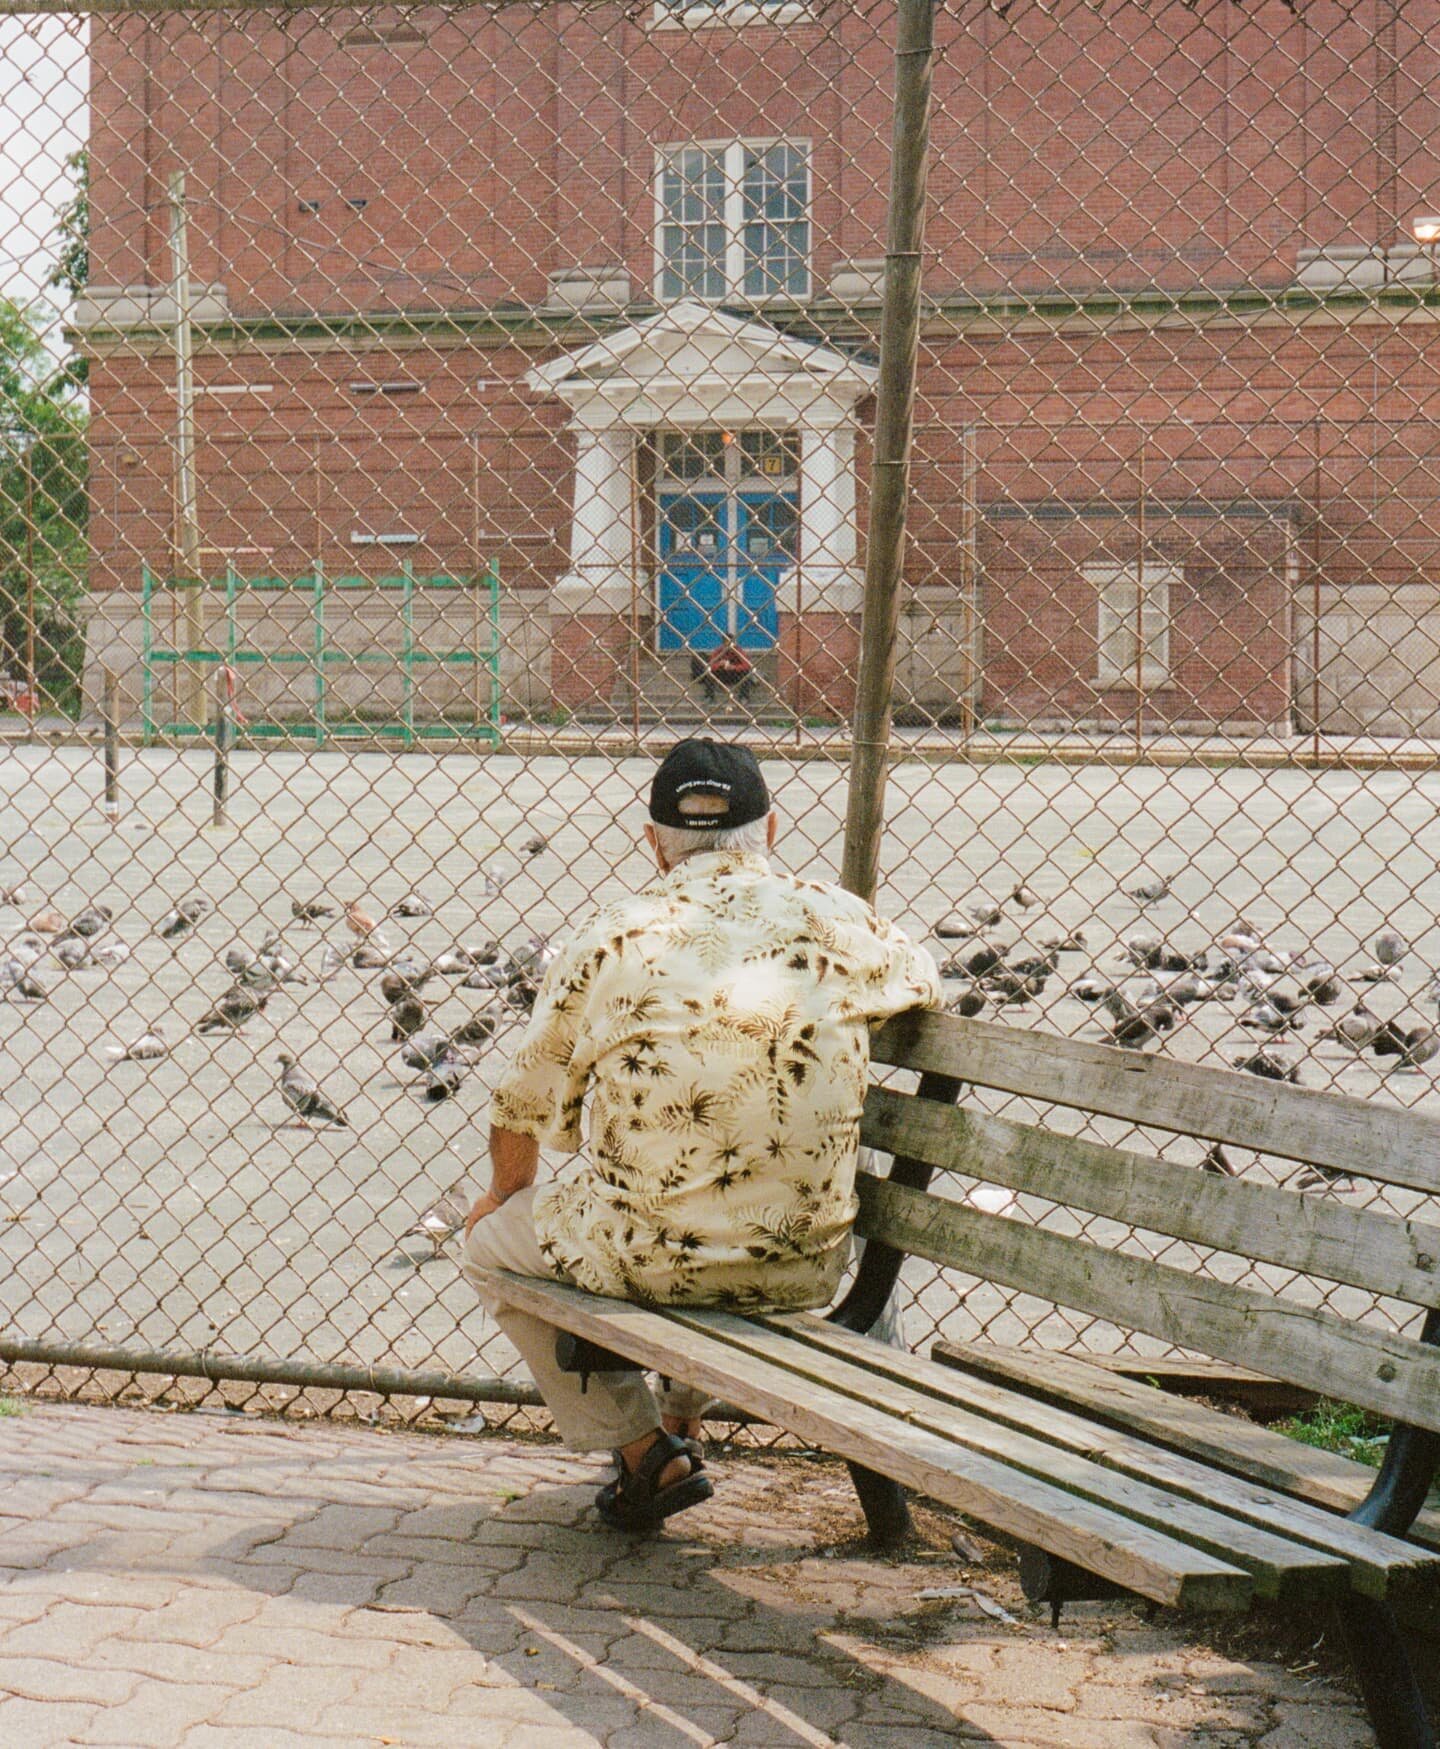 bloordale, august? maybe september? on #portra400 ✧ #35mm 🐦